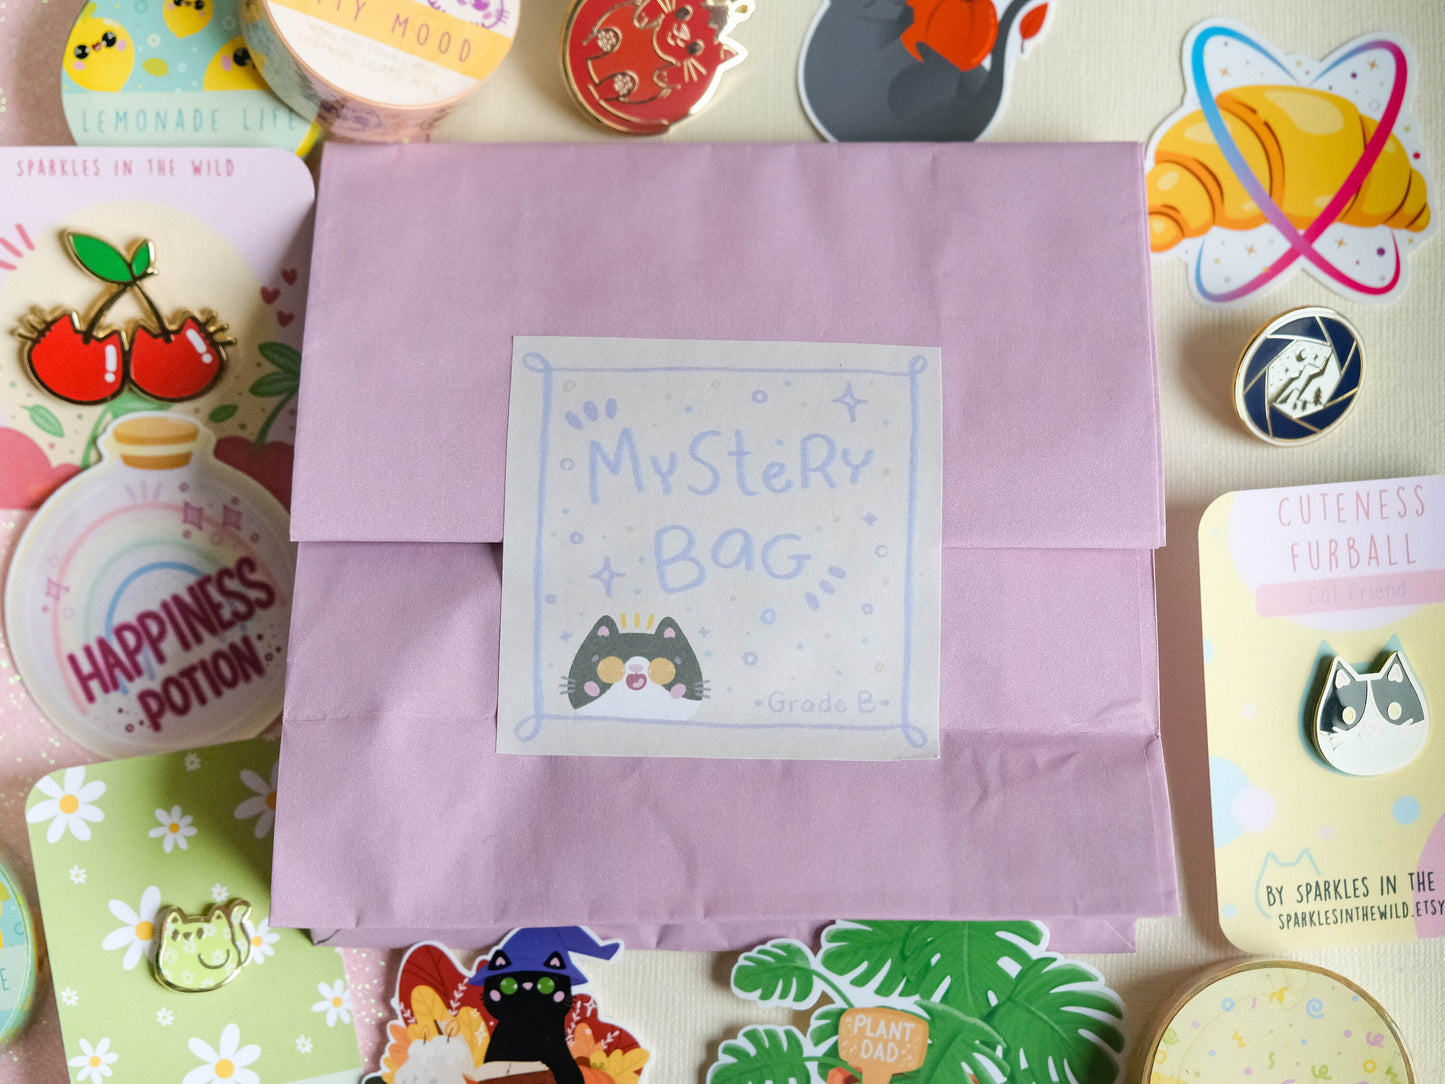 Mystery bag B-grade pack with Enamel Pin, Was Tape and Die-cut Sticker perfect for gift